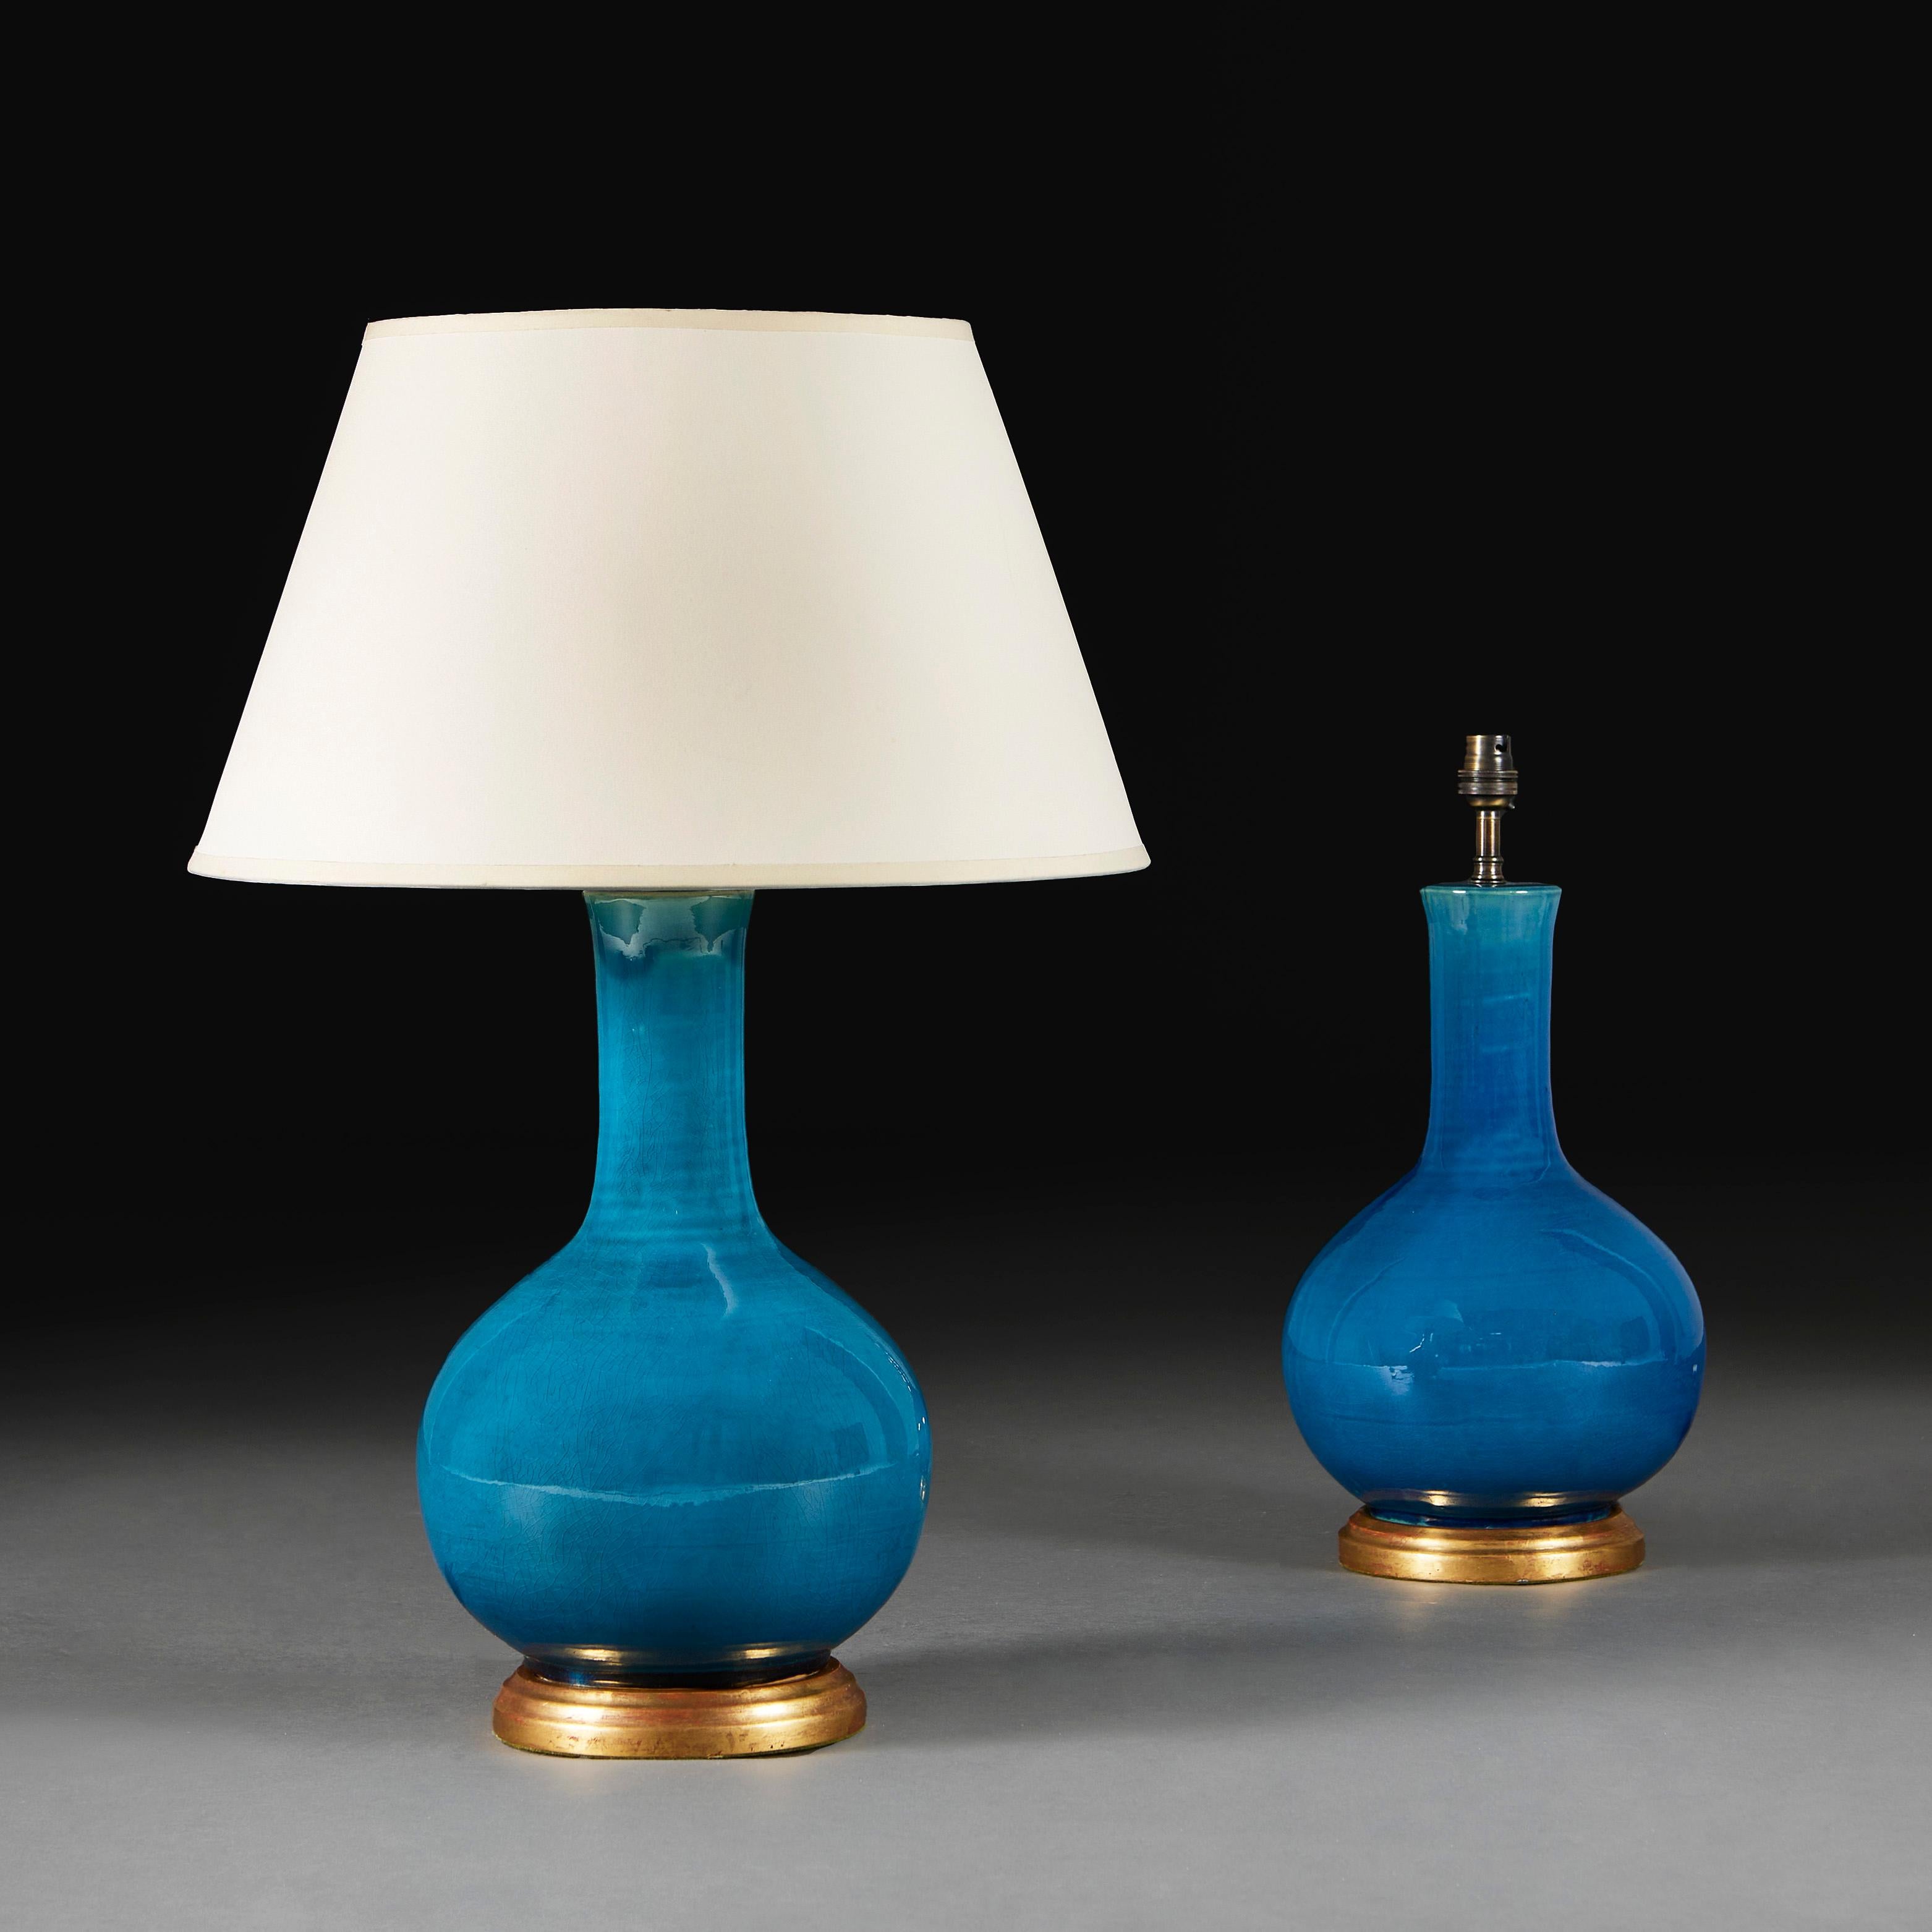 A pair of early twentieth century Chinese vases with brilliant turquoise glaze, of bottle form, now mounted as lamps with turned giltwood bases.

Please note:
Lamps have been photographed with a 16” pale cream Pembroke card lampshade.
Currently